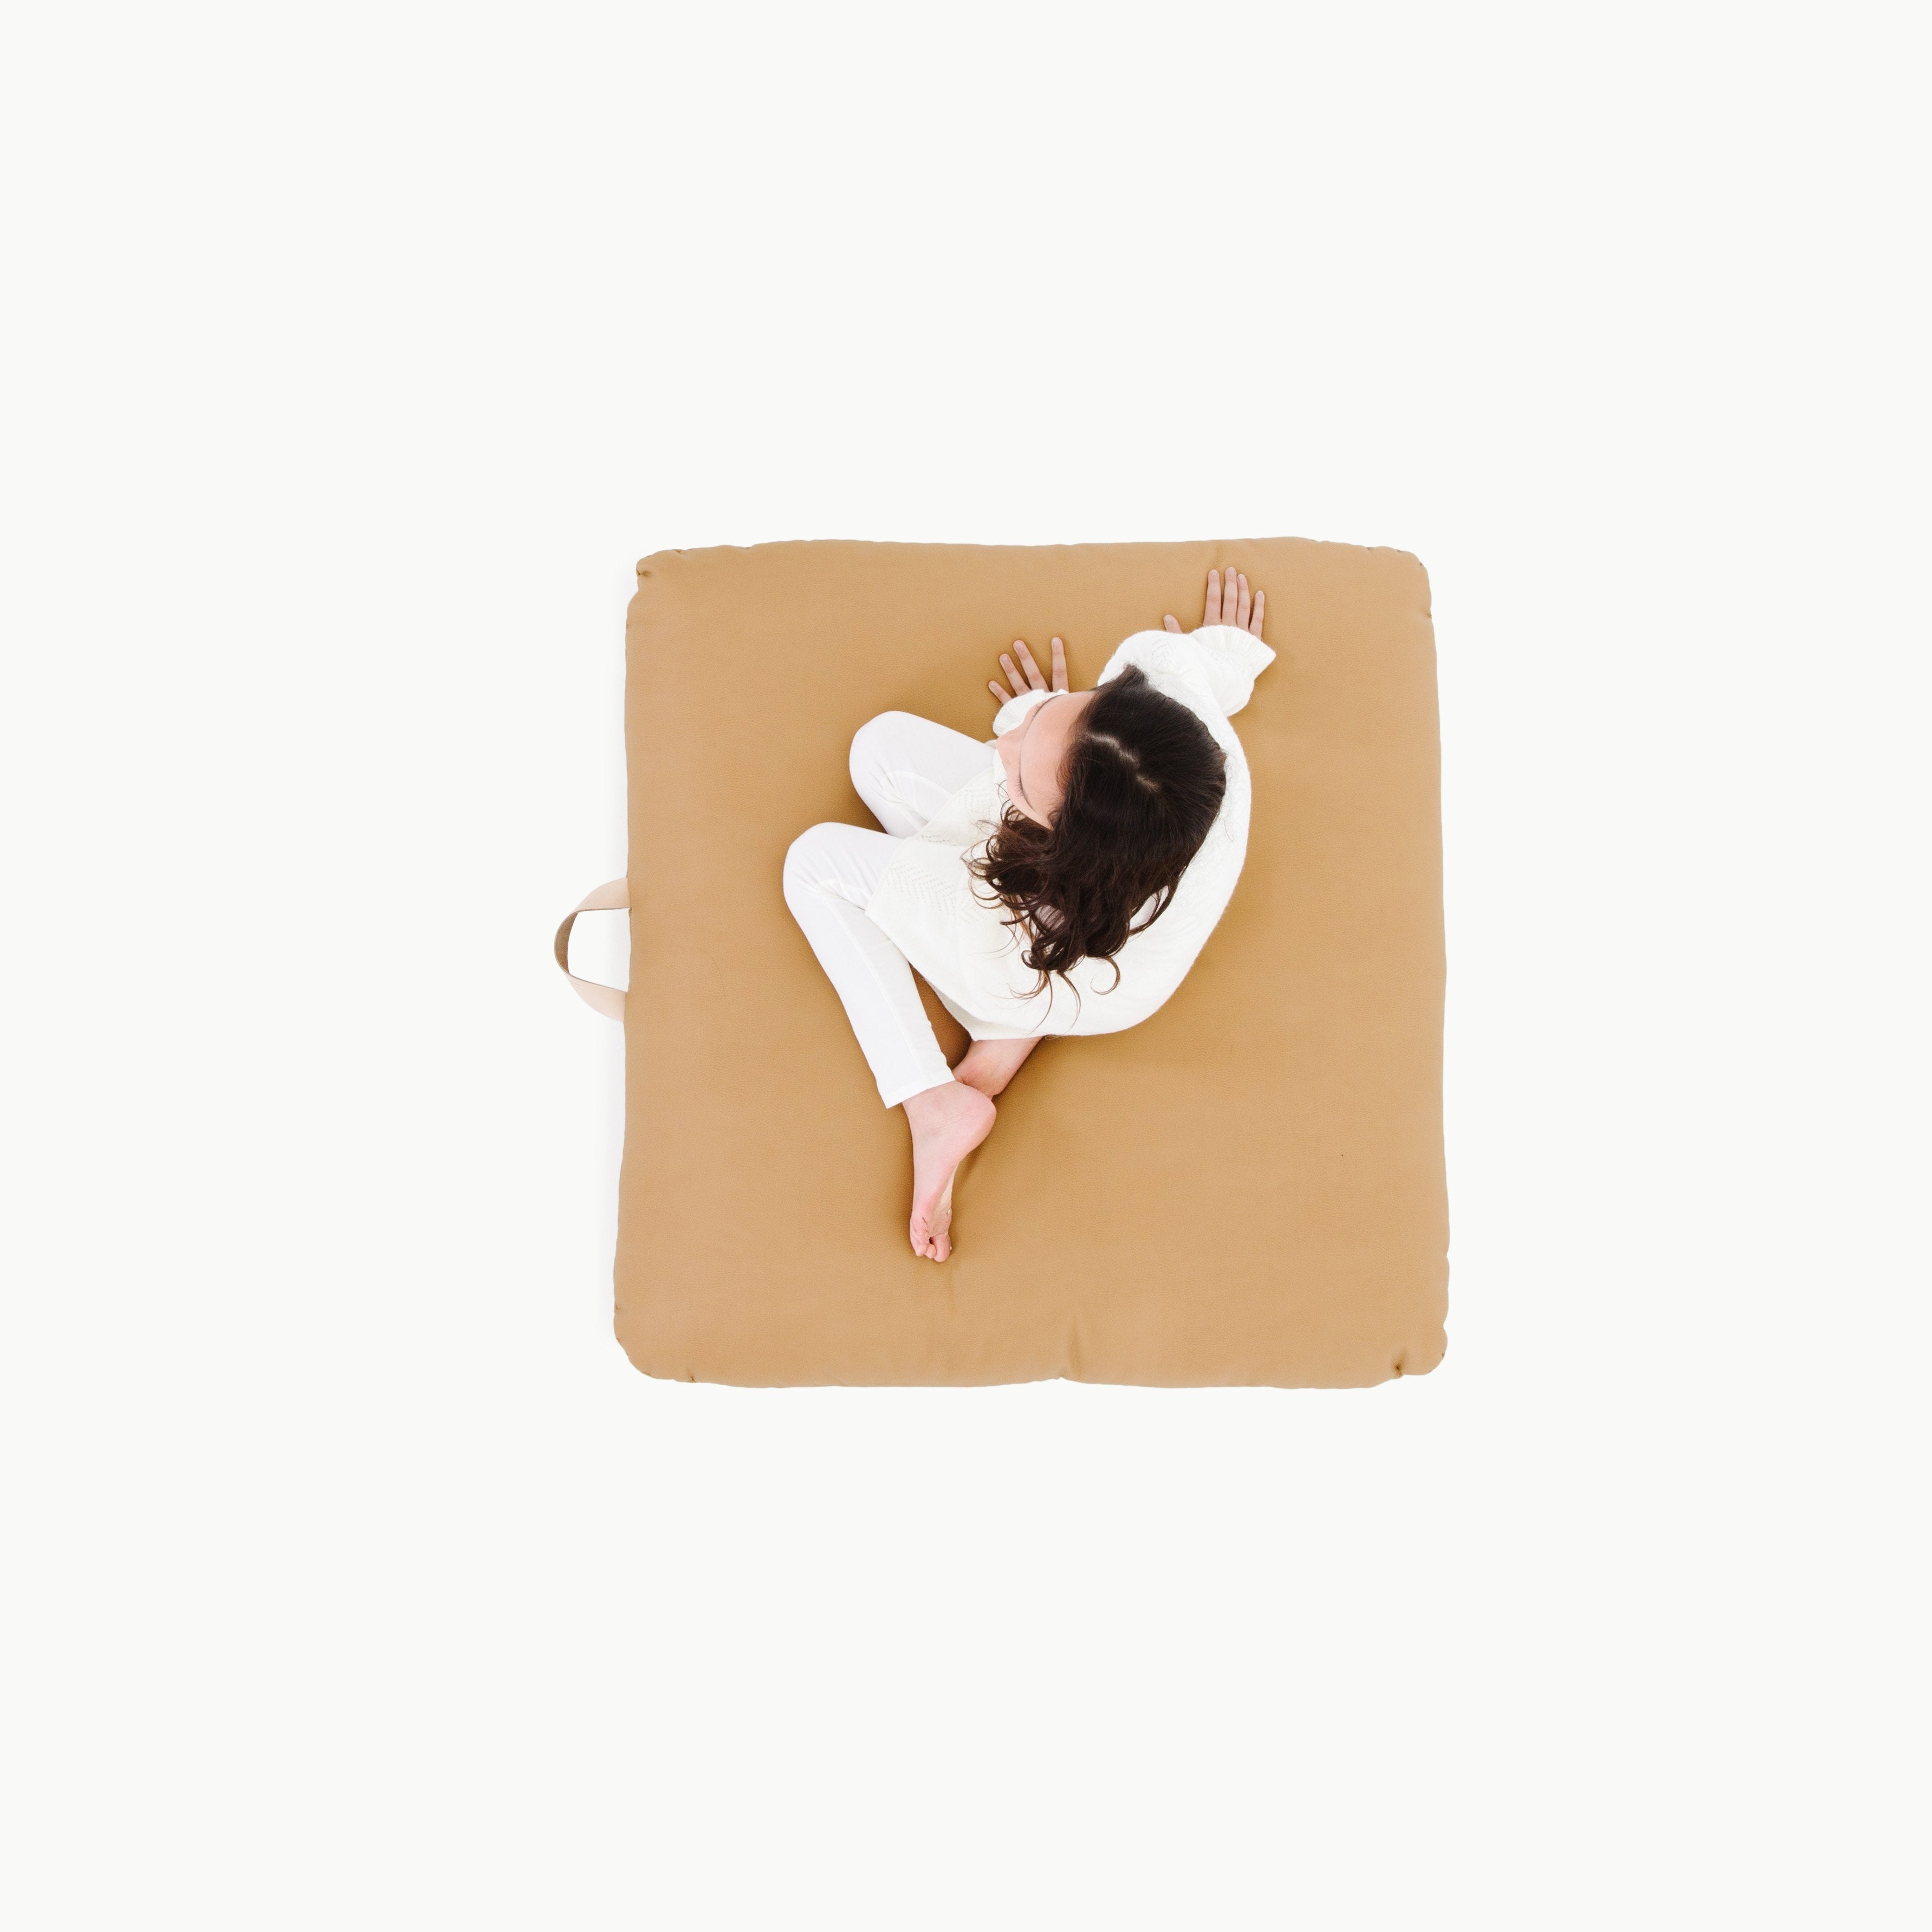 Camel / Square@Overhead kid sitting on the Camel Square Floor Cushion 